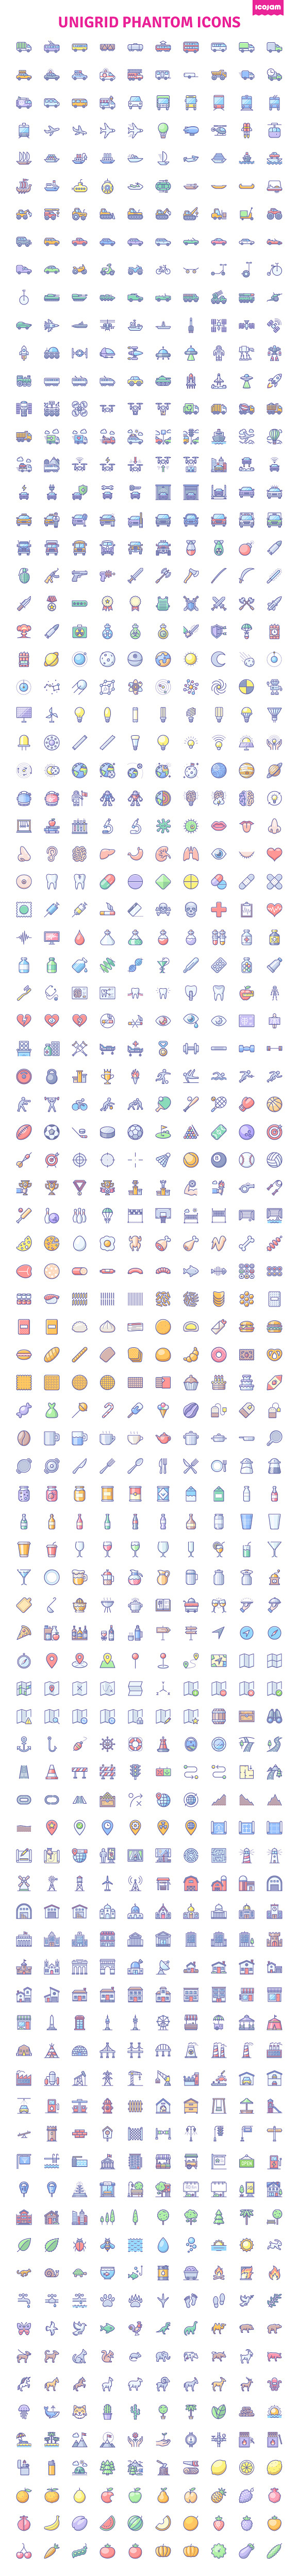 3000 Unigrid Phantom icons in Communication Icons - product preview 1